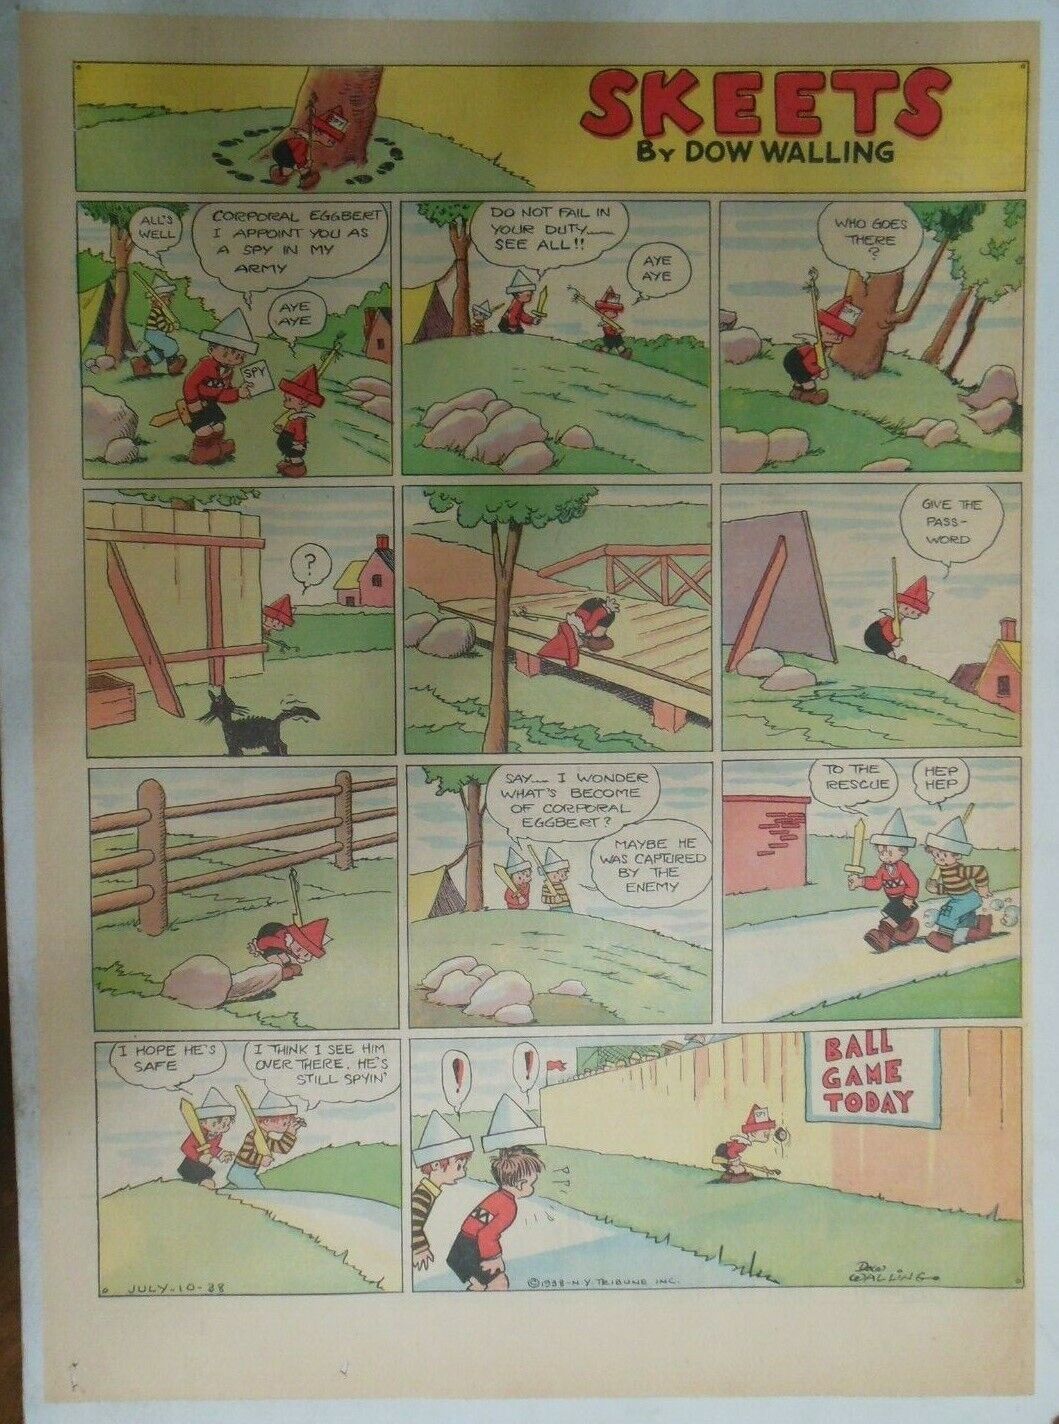 Skeets Sunday Page by Dow Walling from 7/10/1938 Large Full Size Page 